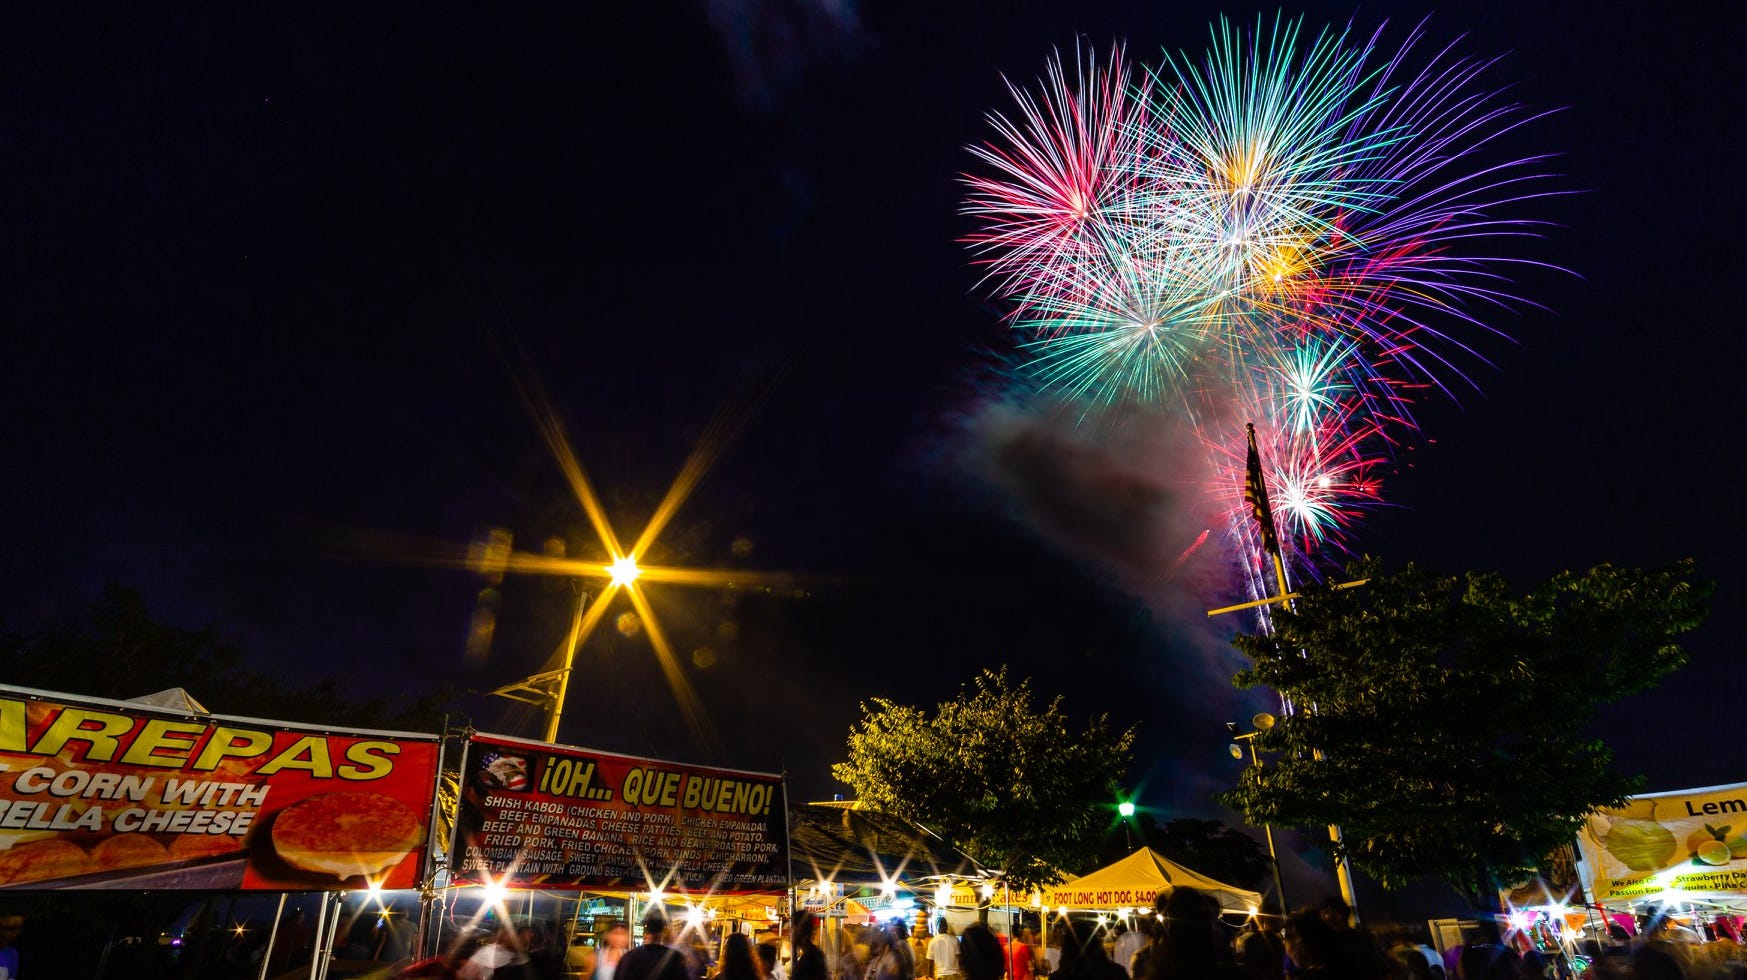 July 4th fireworks Where to watch in Central NJ